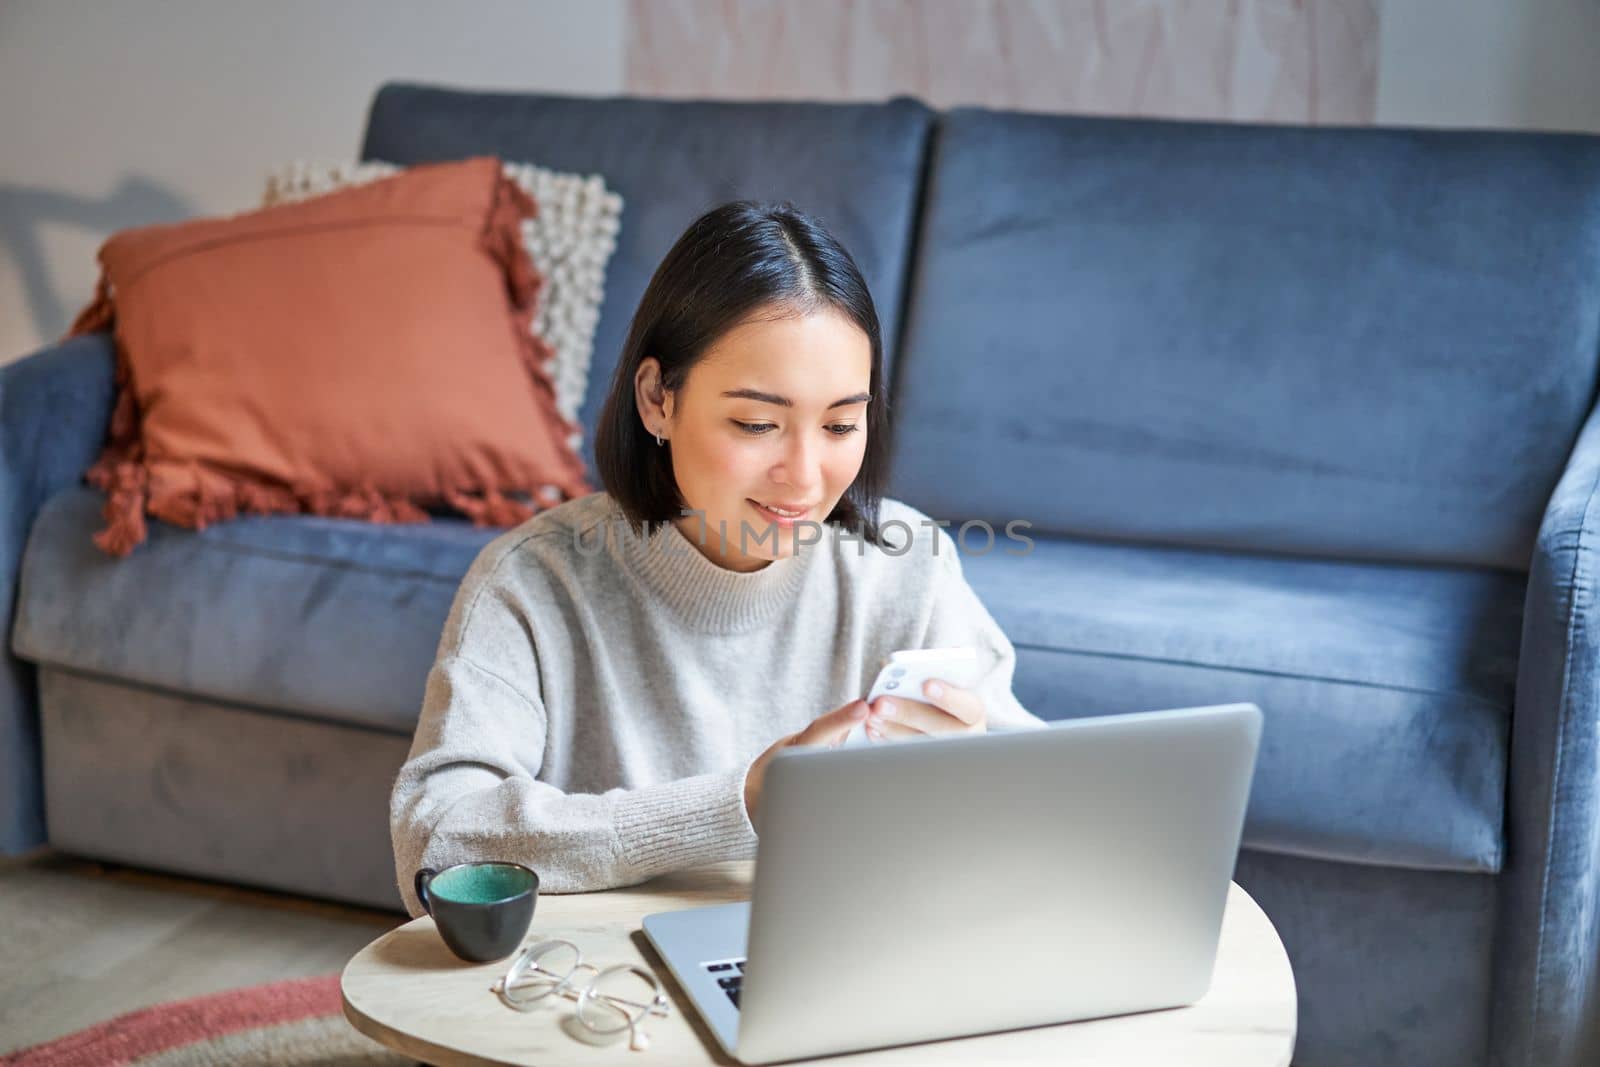 Work from home, freelance and e-learning concept. Young woman studying, sitting in front of laptop, working on remote, worplace in living room.